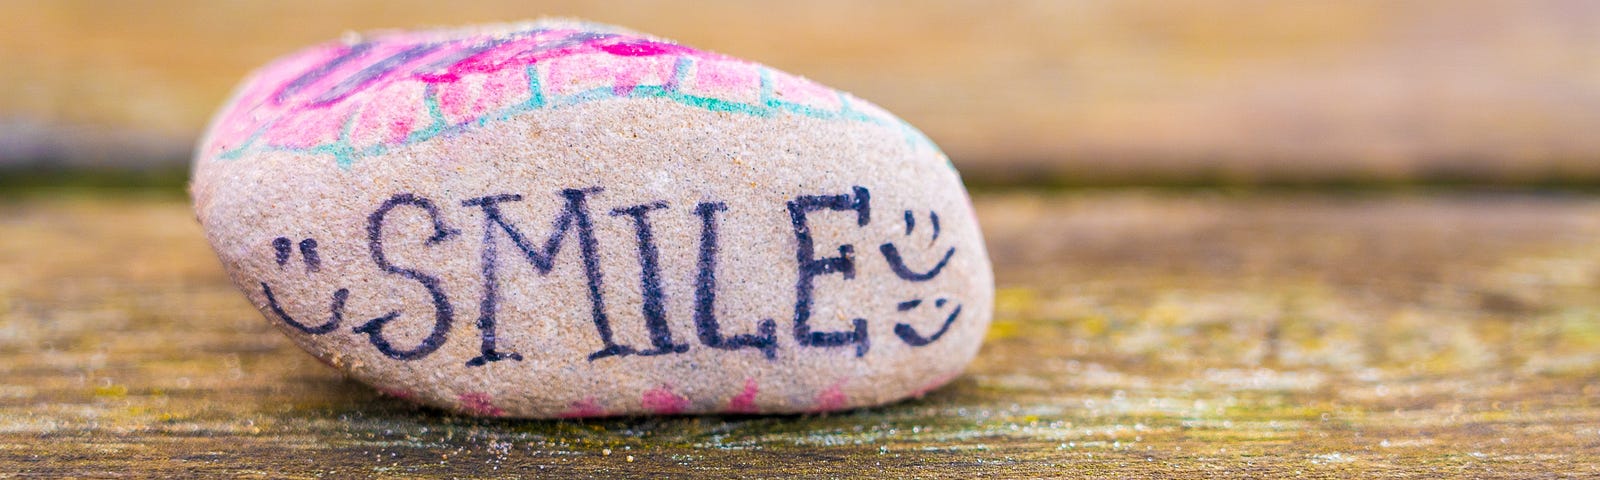 Small rock painted with the word “smile” with happy faces.